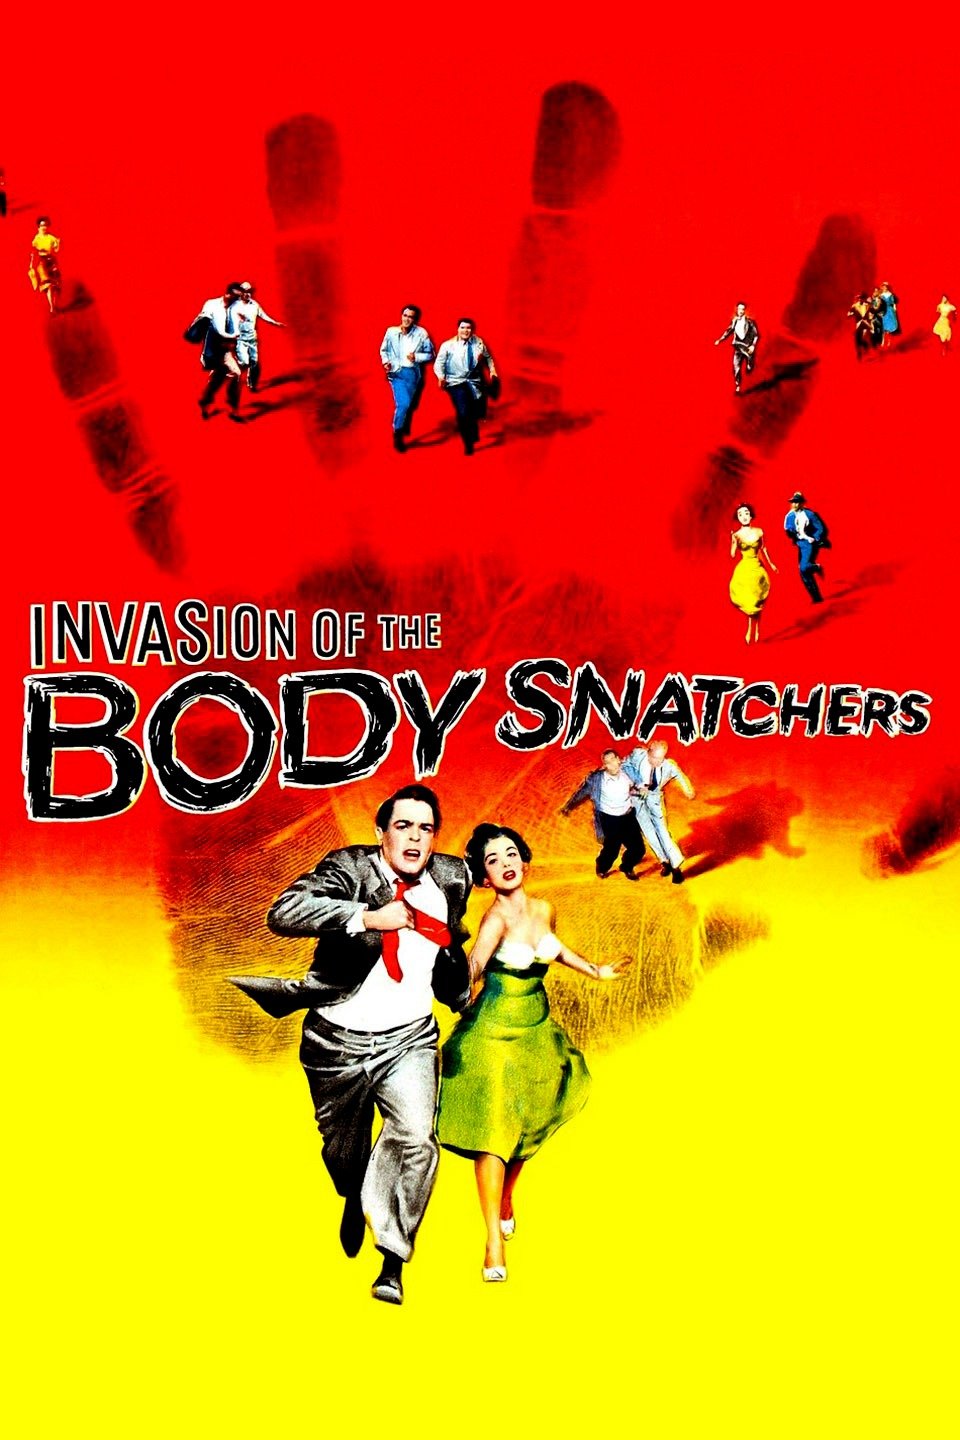 Invasion of the Body Snatchers - Top 25 Horror Movies of All Time